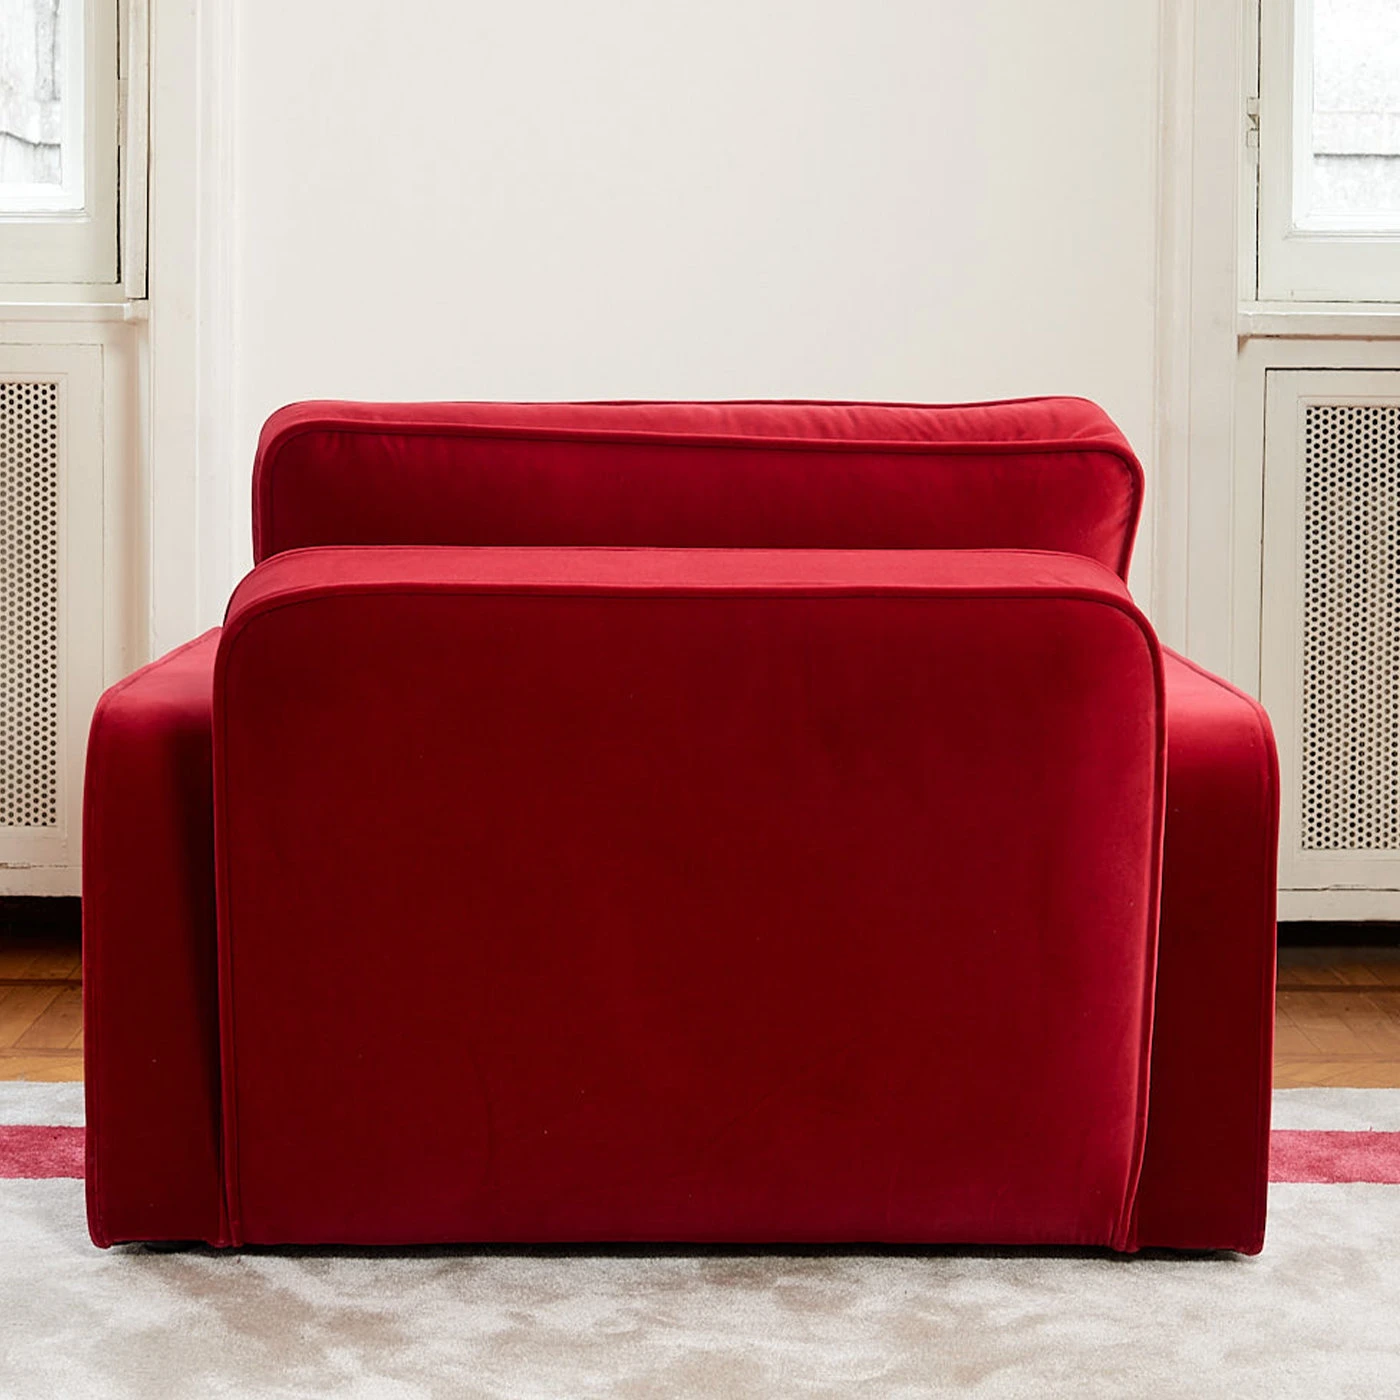 ROMEO RED ARMCHAIR